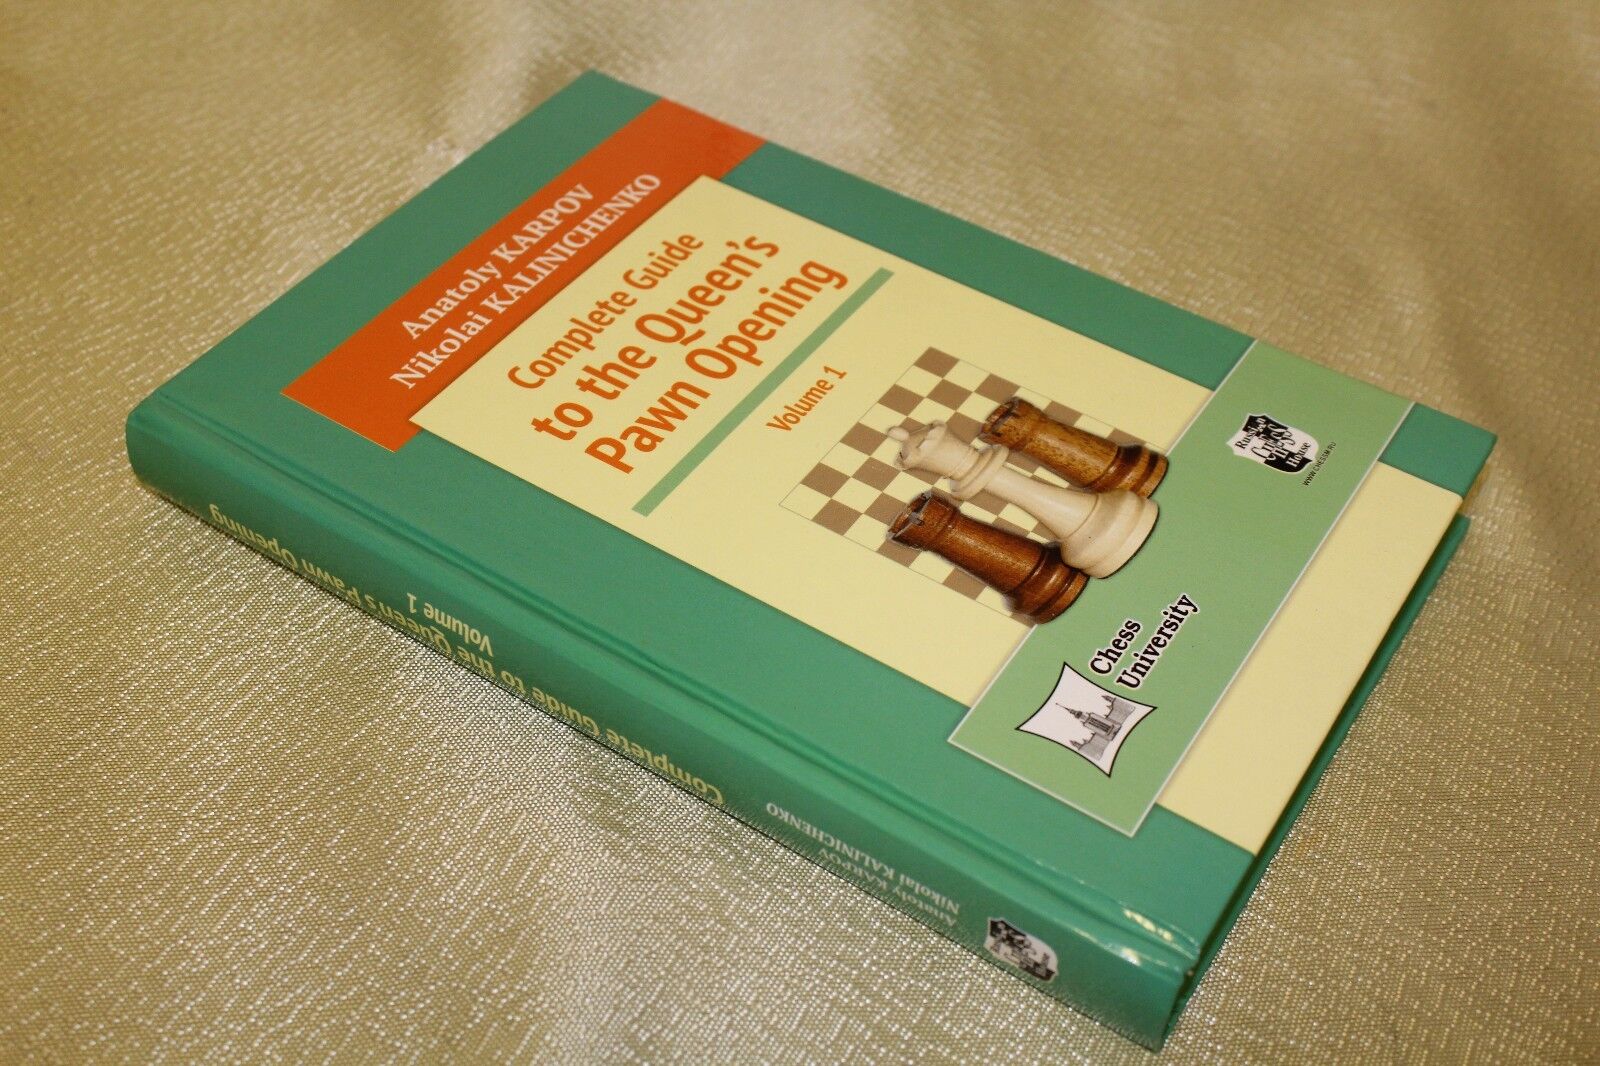 Two Chess Books: Karpov, Kalinichenko.Complete Guide to the Quin's Pawn  Opening